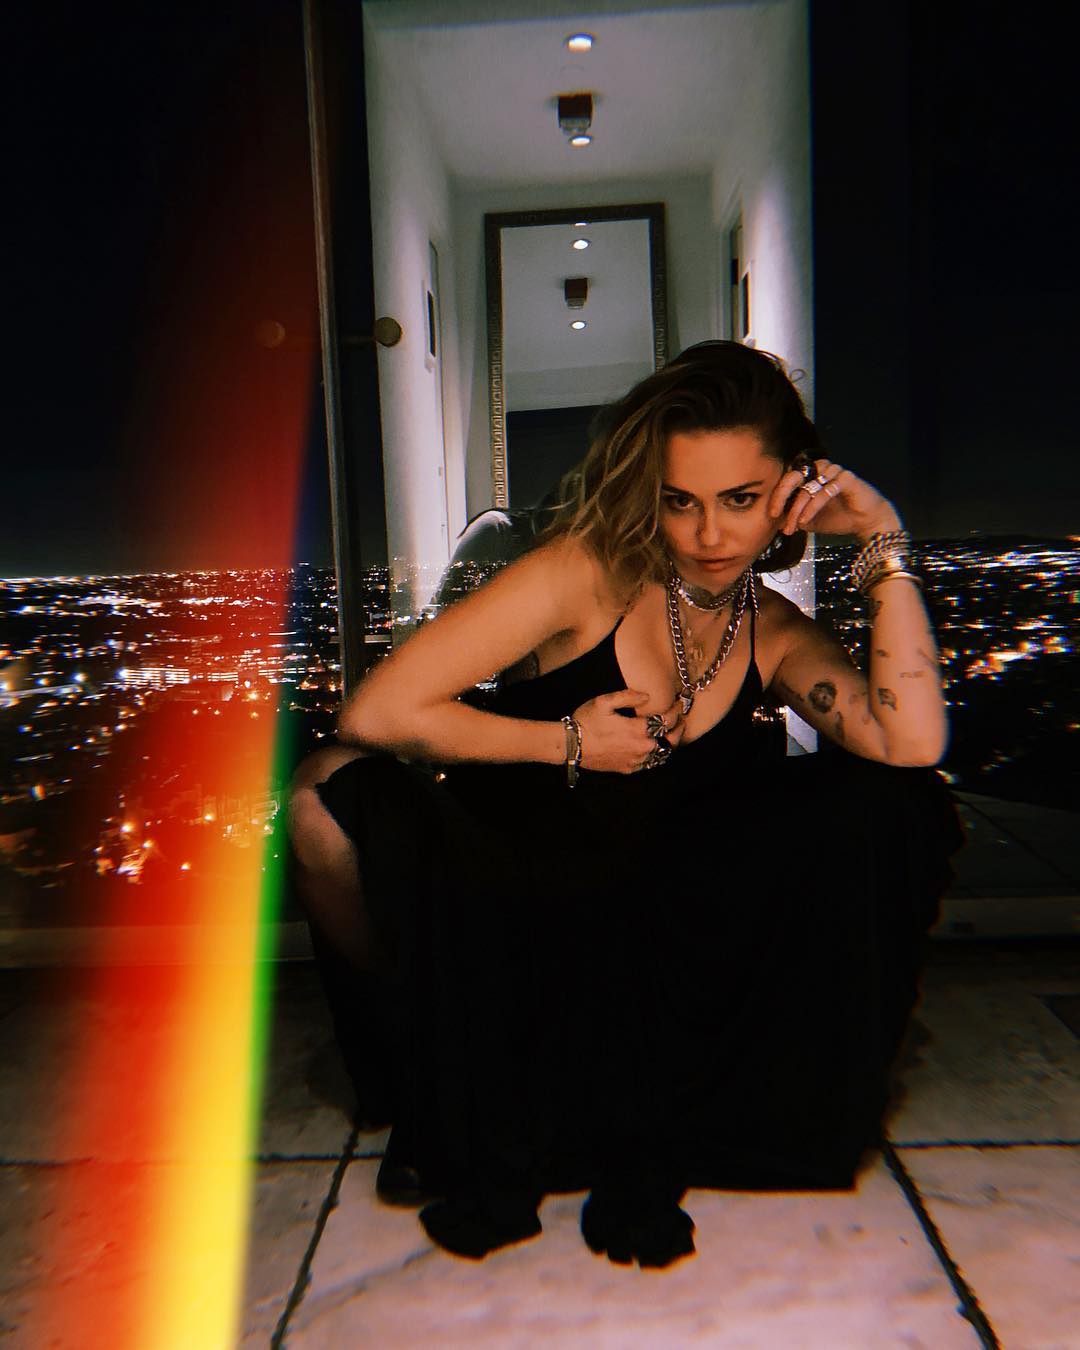 Miley Cyrus Shares Sexy Instagram Photos in Low-Cut Black Dress After Getting New Ink